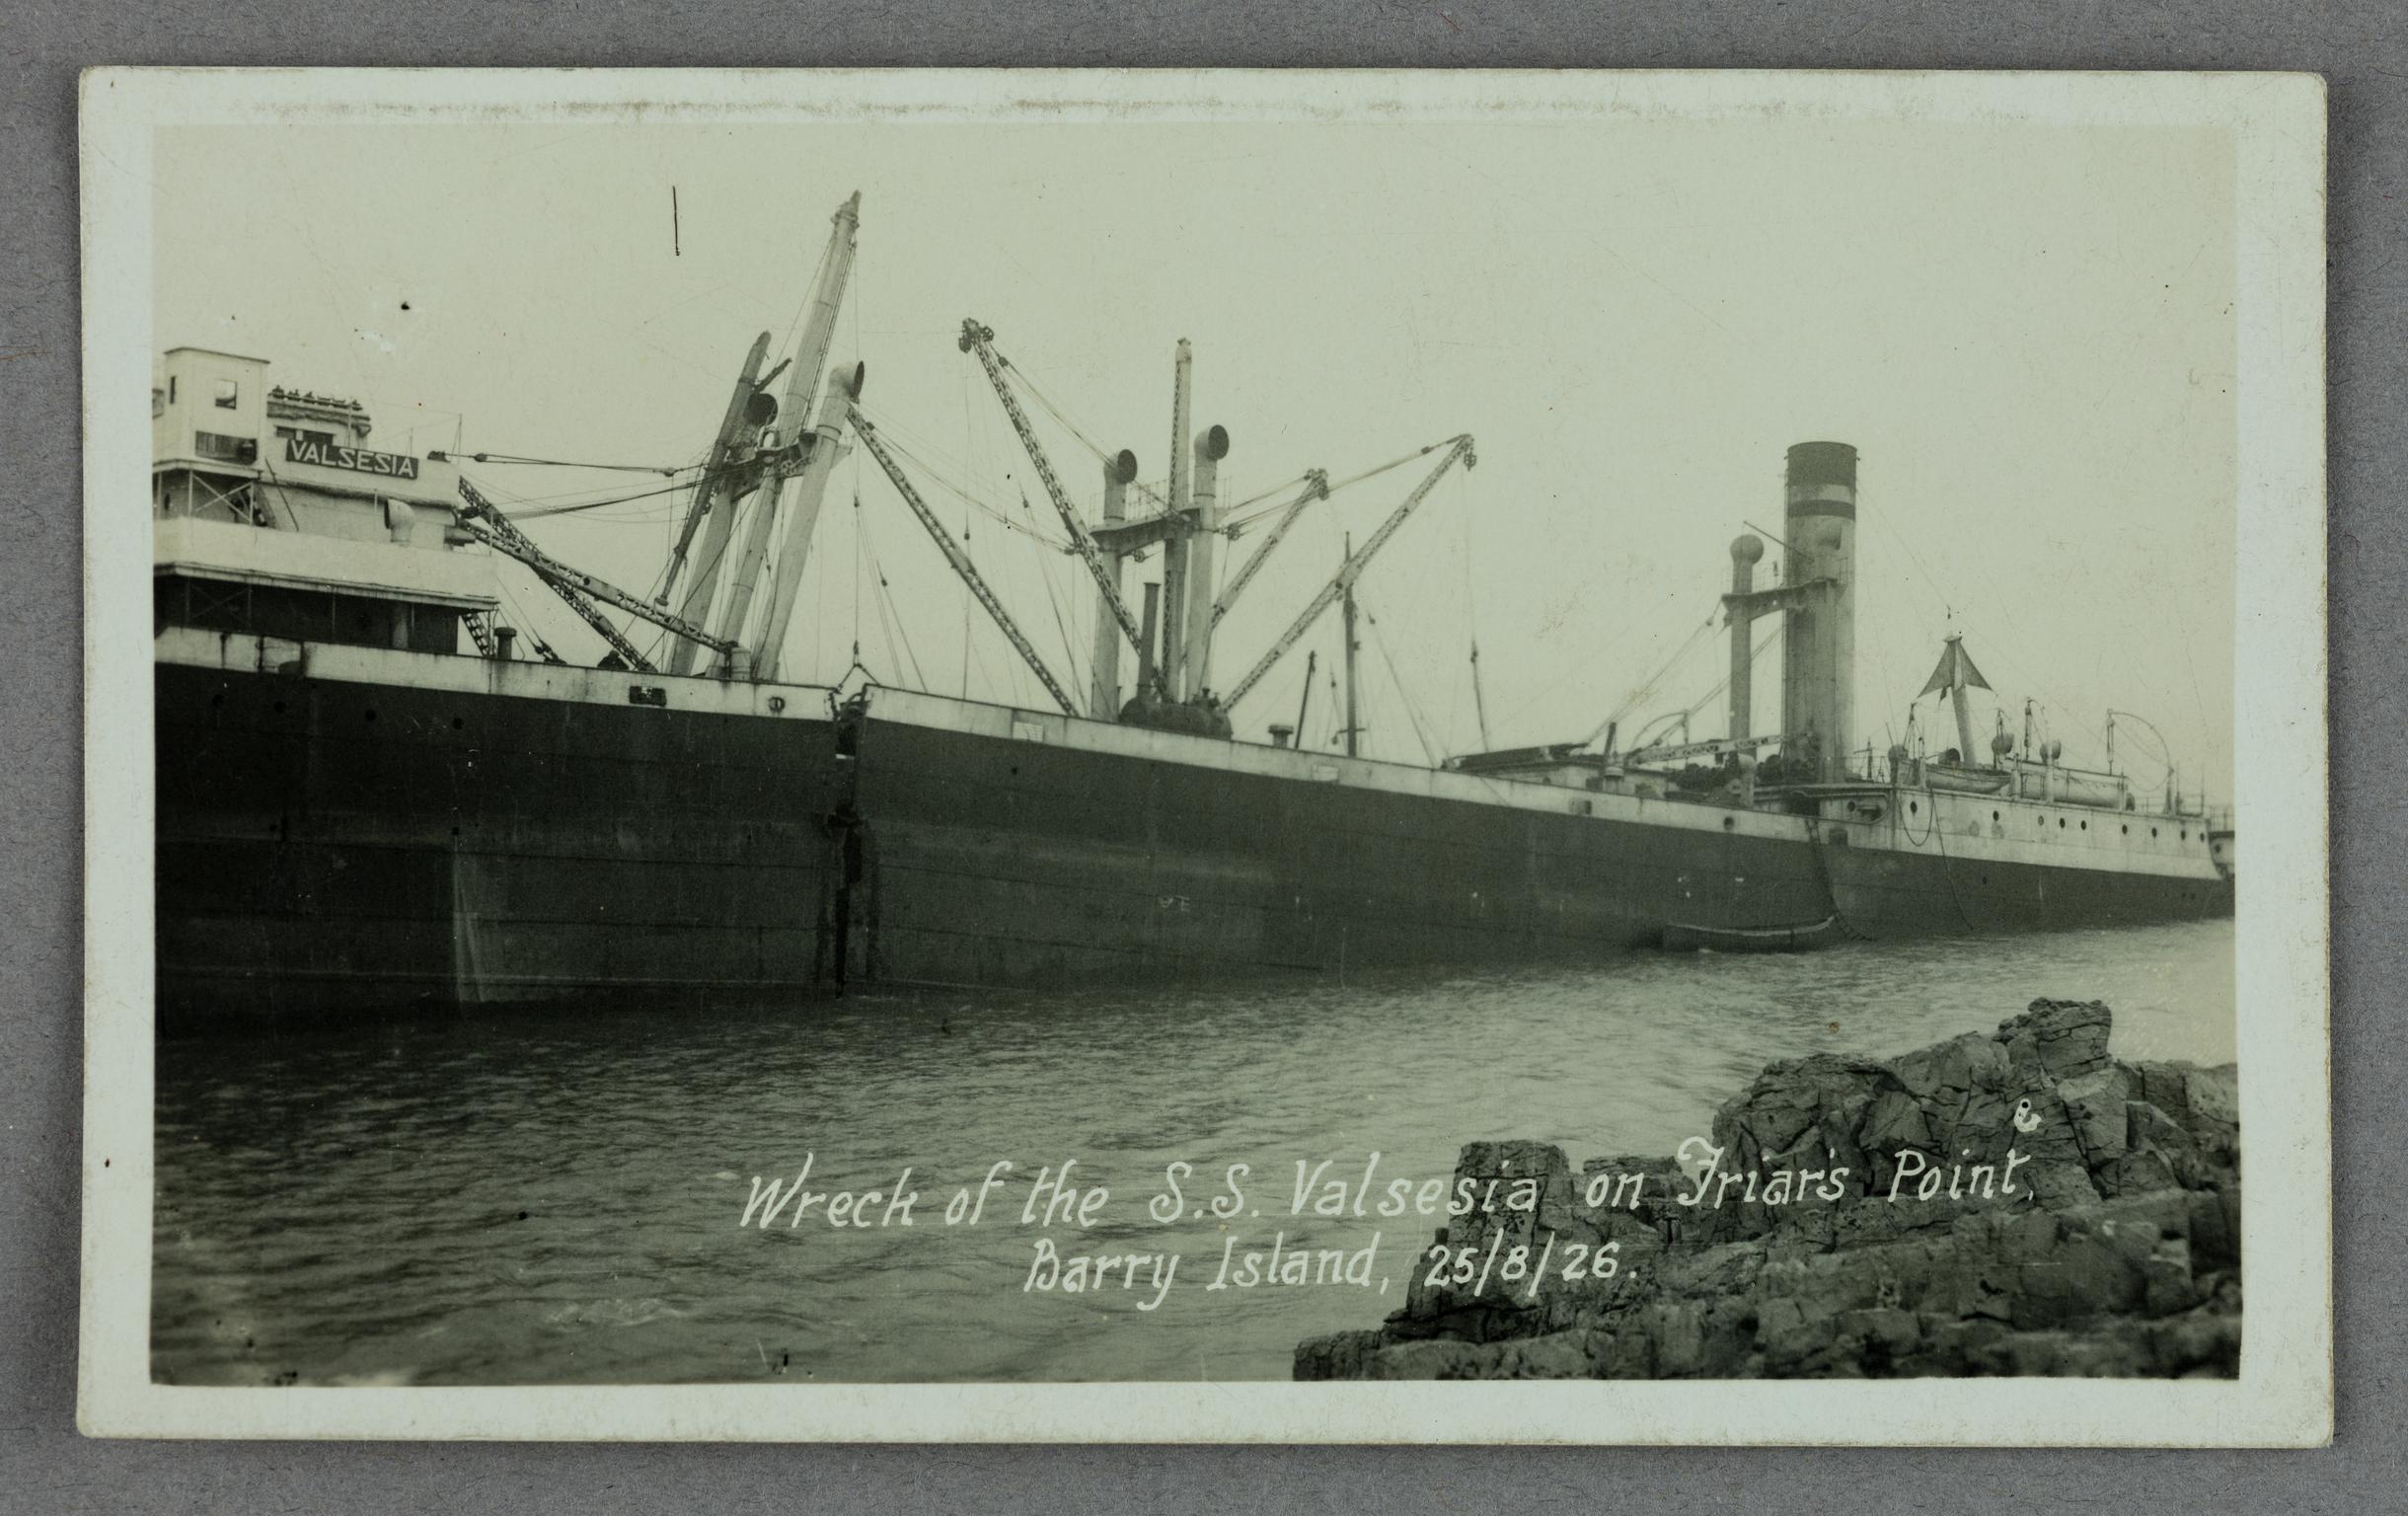 Wreck of the S.S. Valsesia on Friar's Point Barry Island, 25/8/26 (postcard)